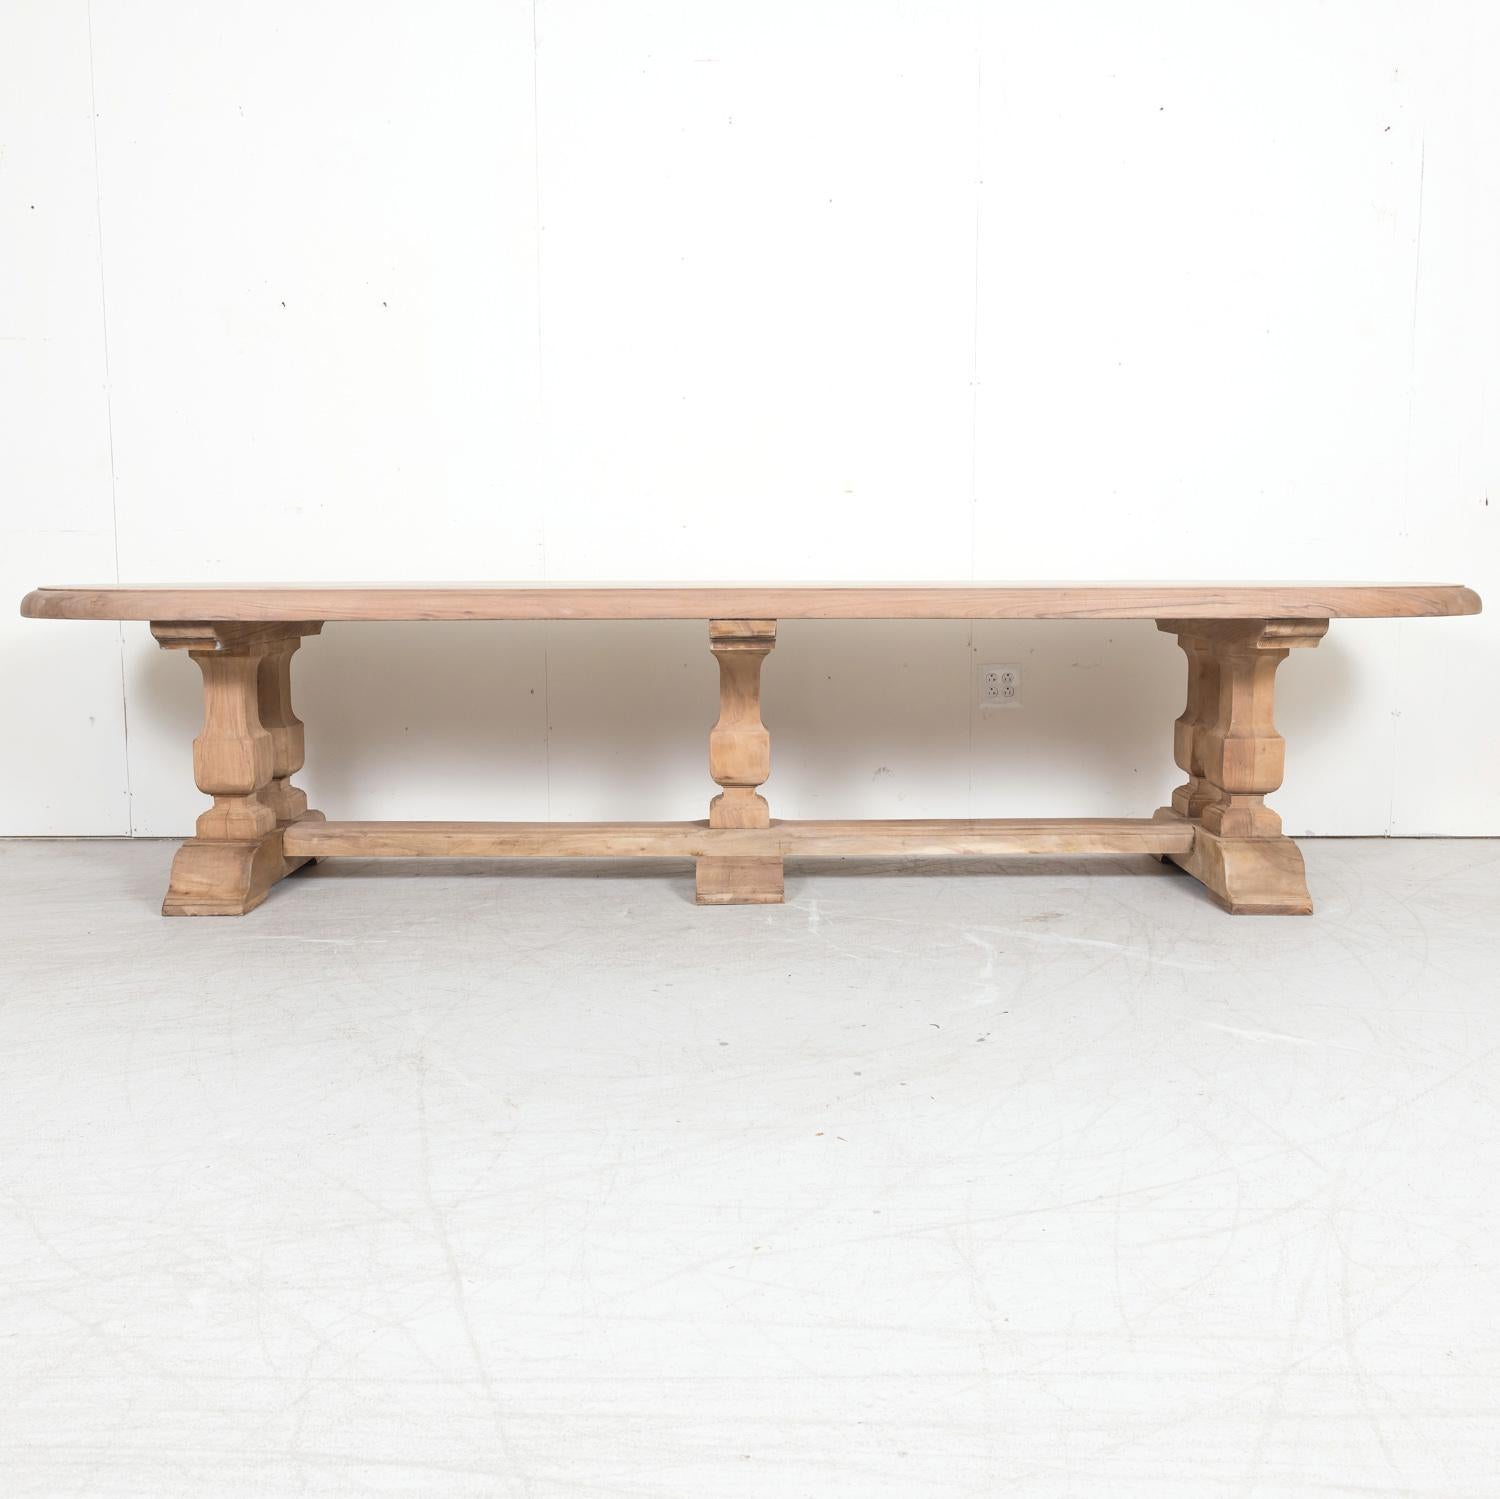 Impressive Antique French Bleached Walnut Trestle Dining Table with Rounded Ends 12